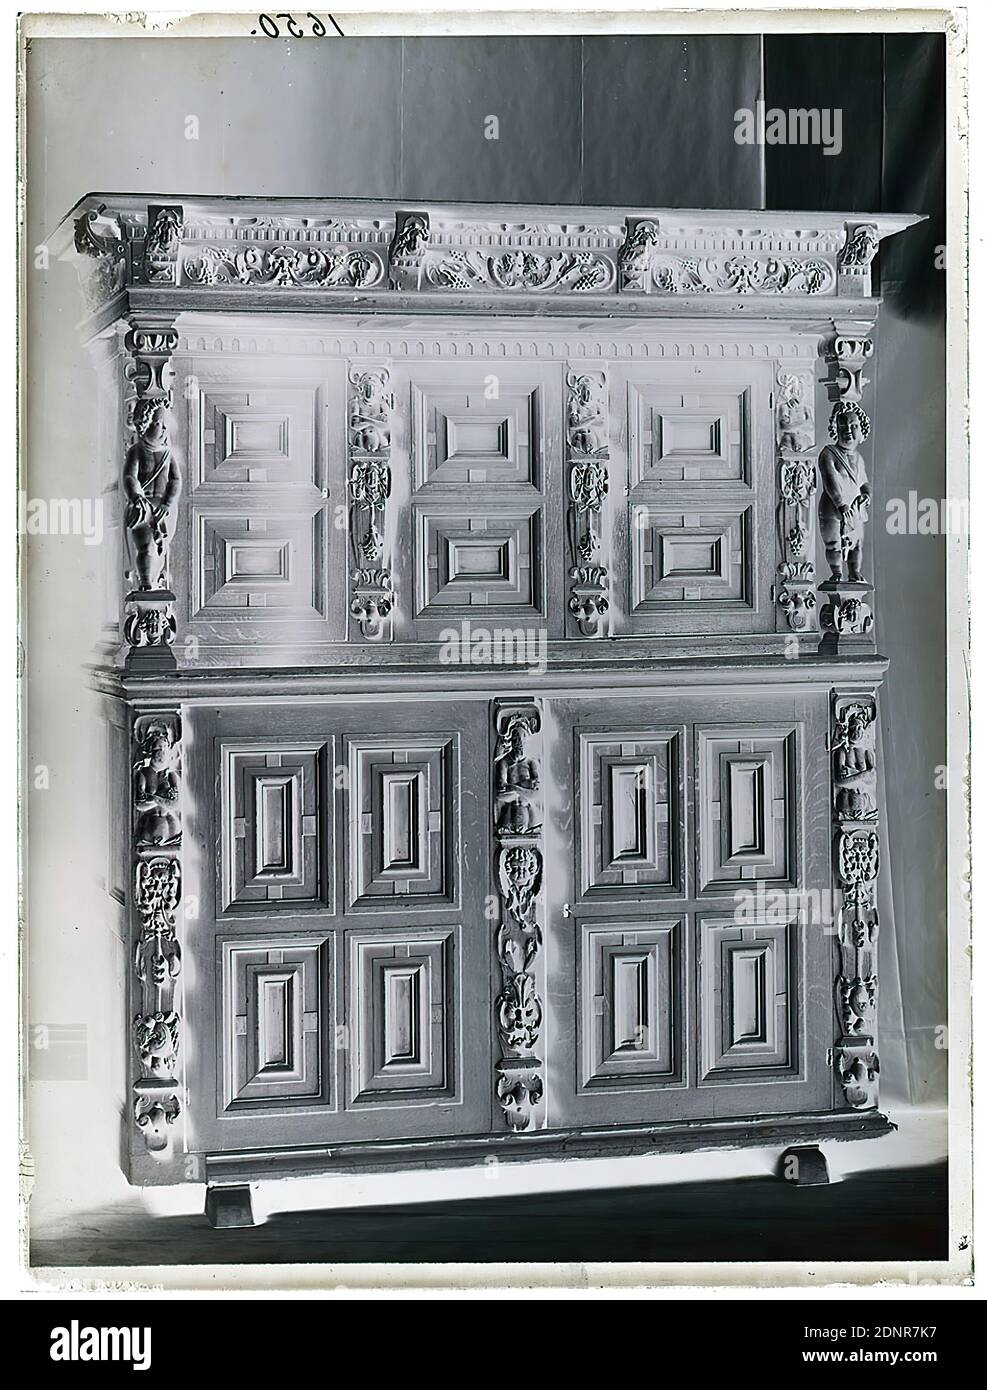 Wilhelm Weimar, credenza cabinet, glass negative, black and white negative process, total: height: 23,8 cm; width: 17,8 cm, numbered: top left: in black ink: 1650, work of applied arts (wood, e.g. panelling), ornaments, angels (Christian religion), fruits, cupids, putti, tendril ornament, grape, supporting figure, furniture and household effects. As a trained engraver and graduate of the School of Arts and Crafts Stock Photo